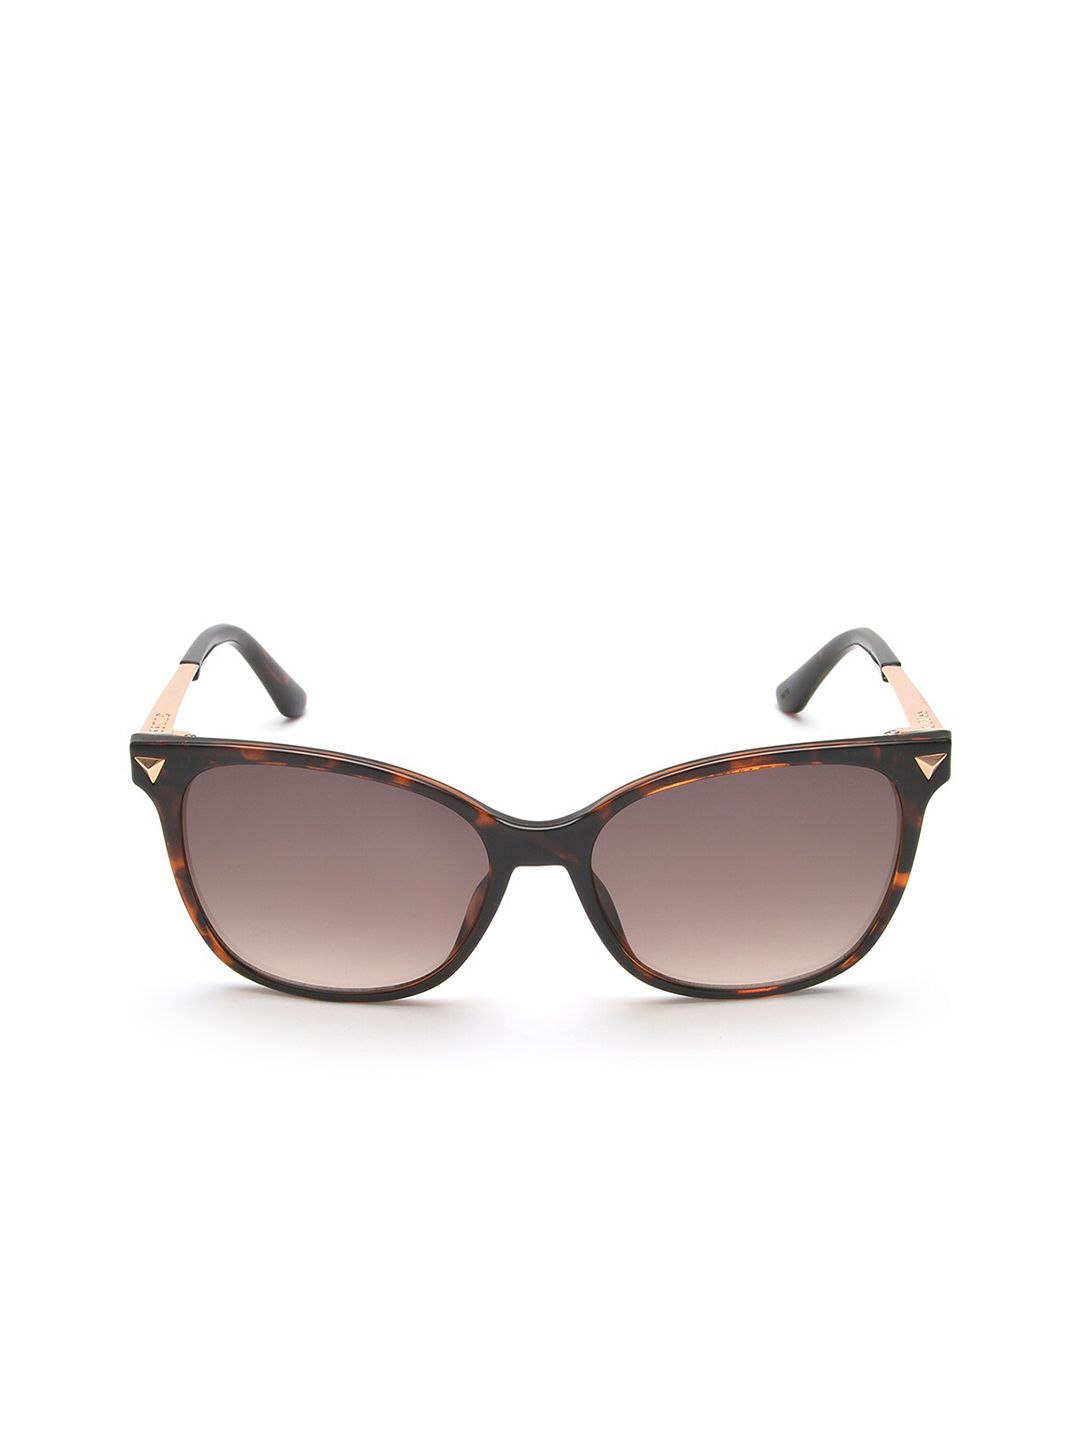 GUESS Women Brown Lens & Black Square Sunglasses Price in India